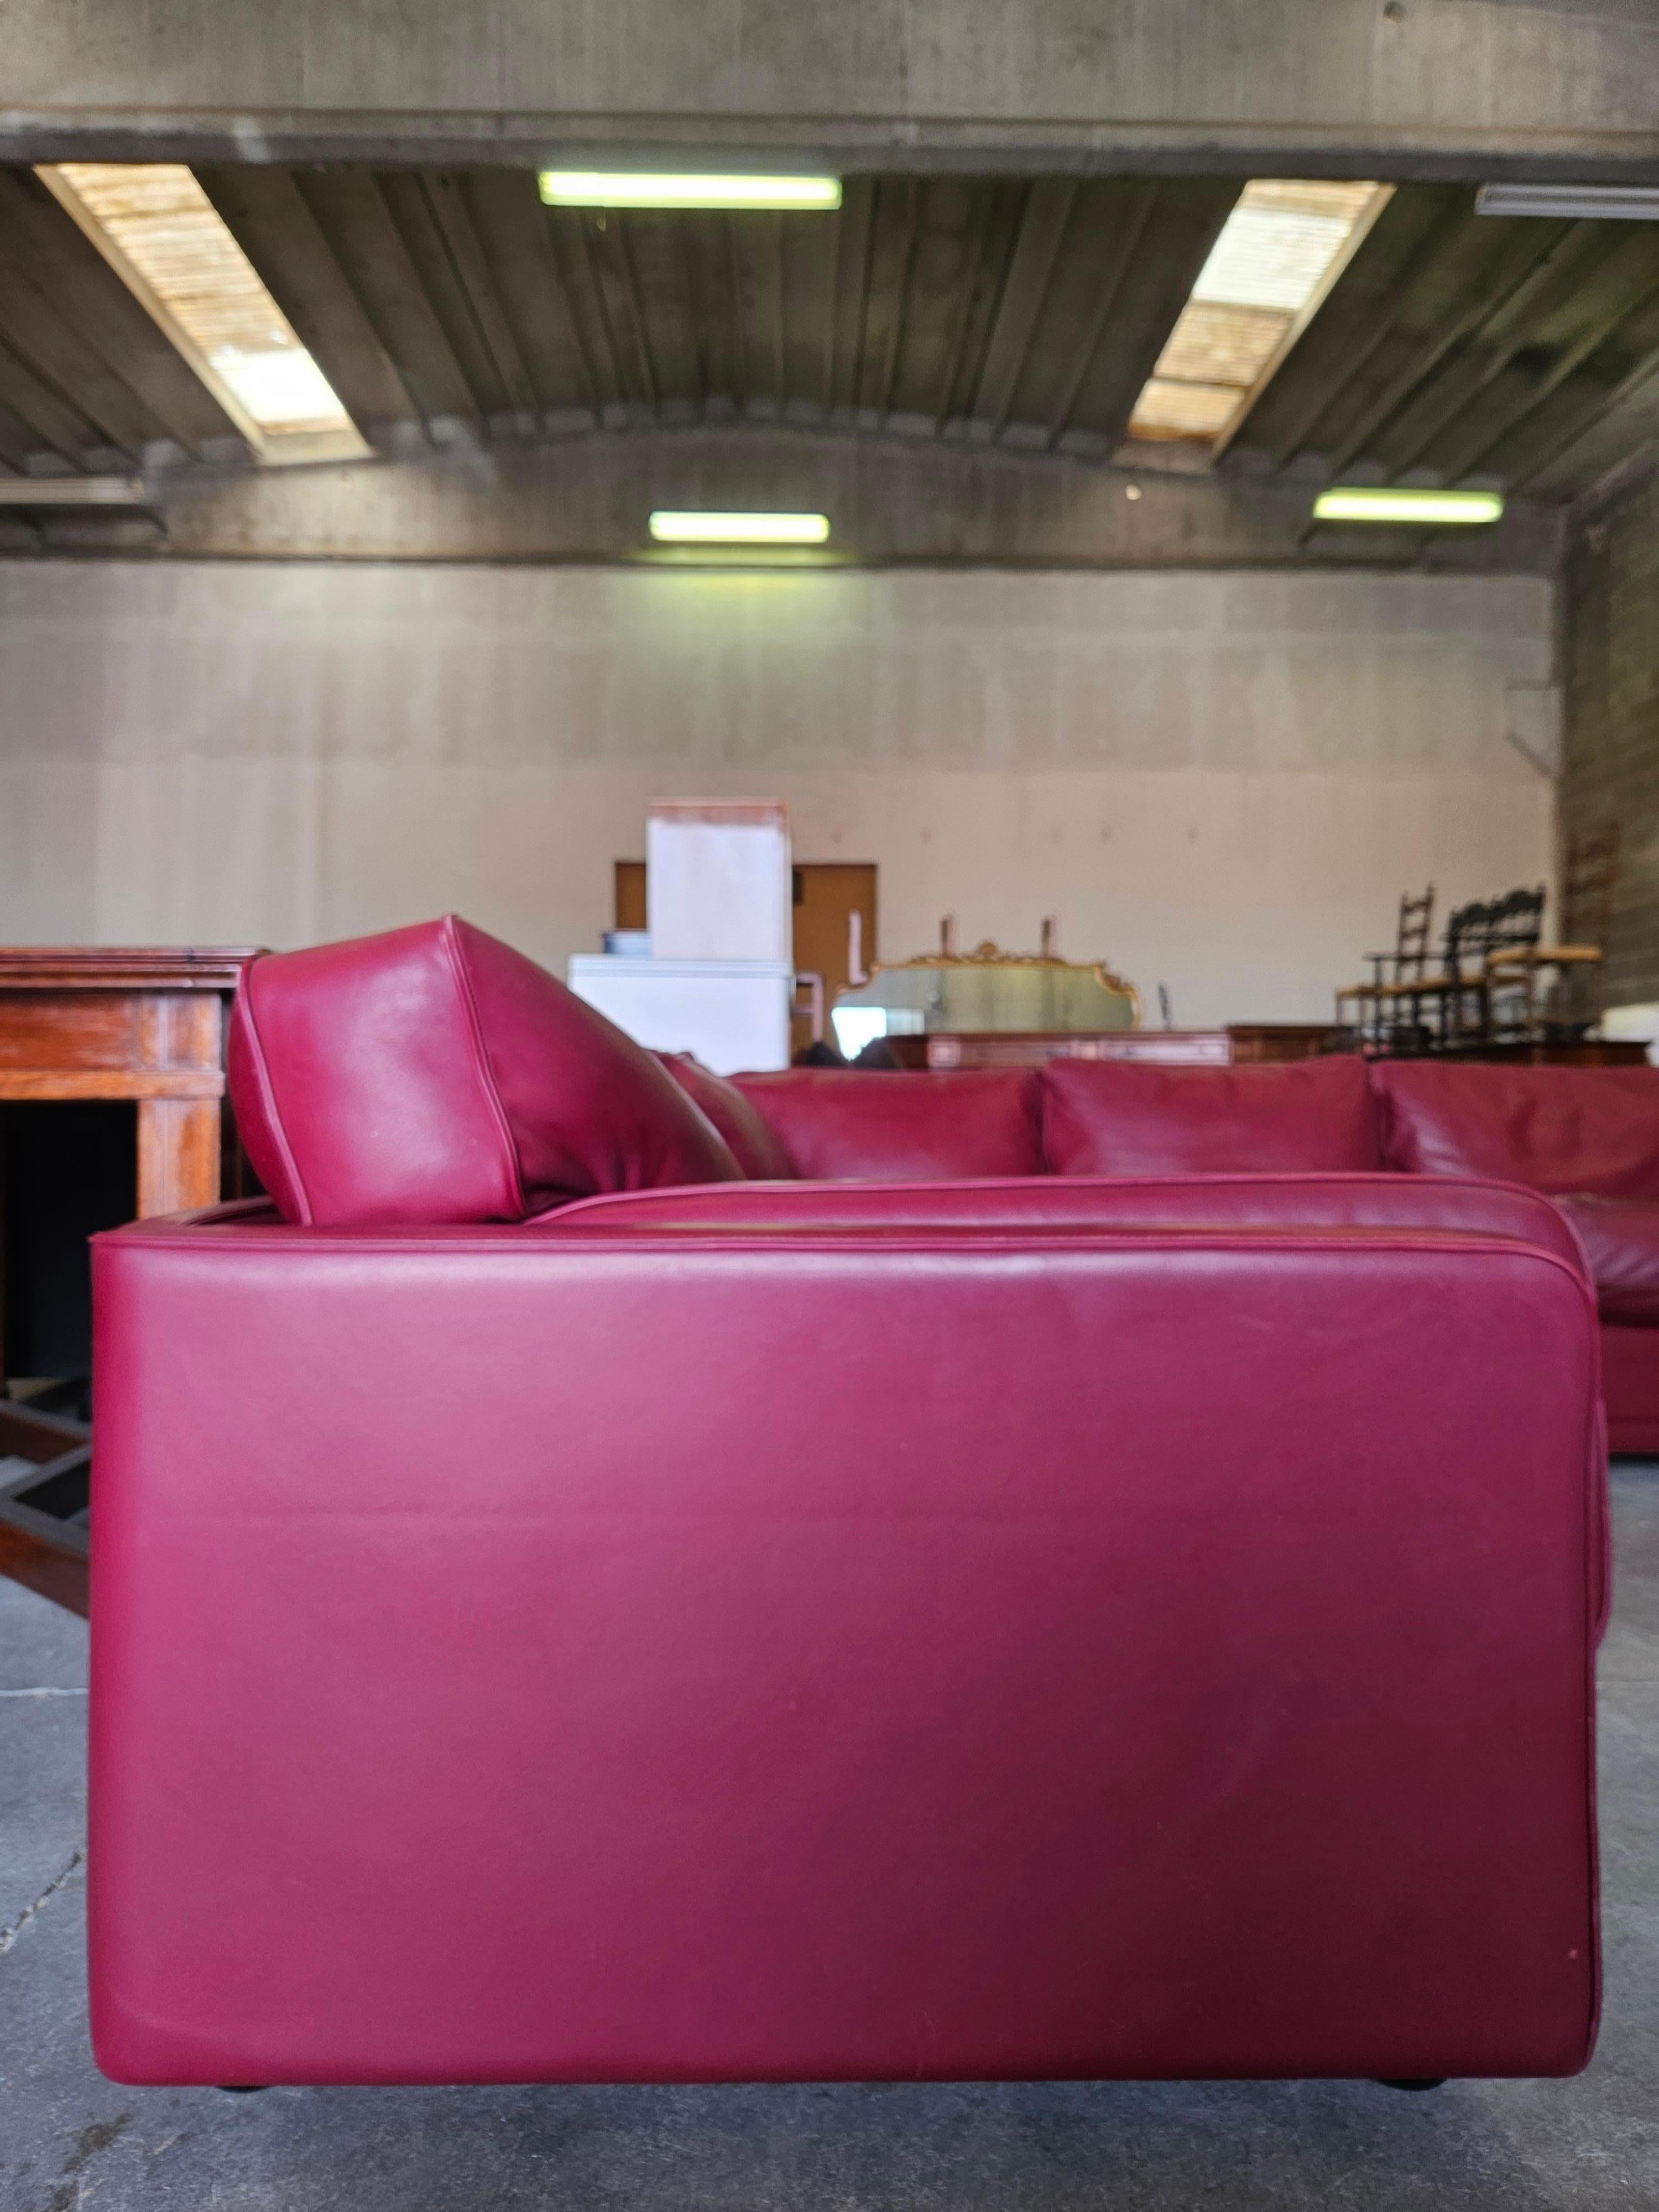 Socrates modular leather sofa by Poltrona Frau, 1970s In Good Condition For Sale In Premariacco, IT